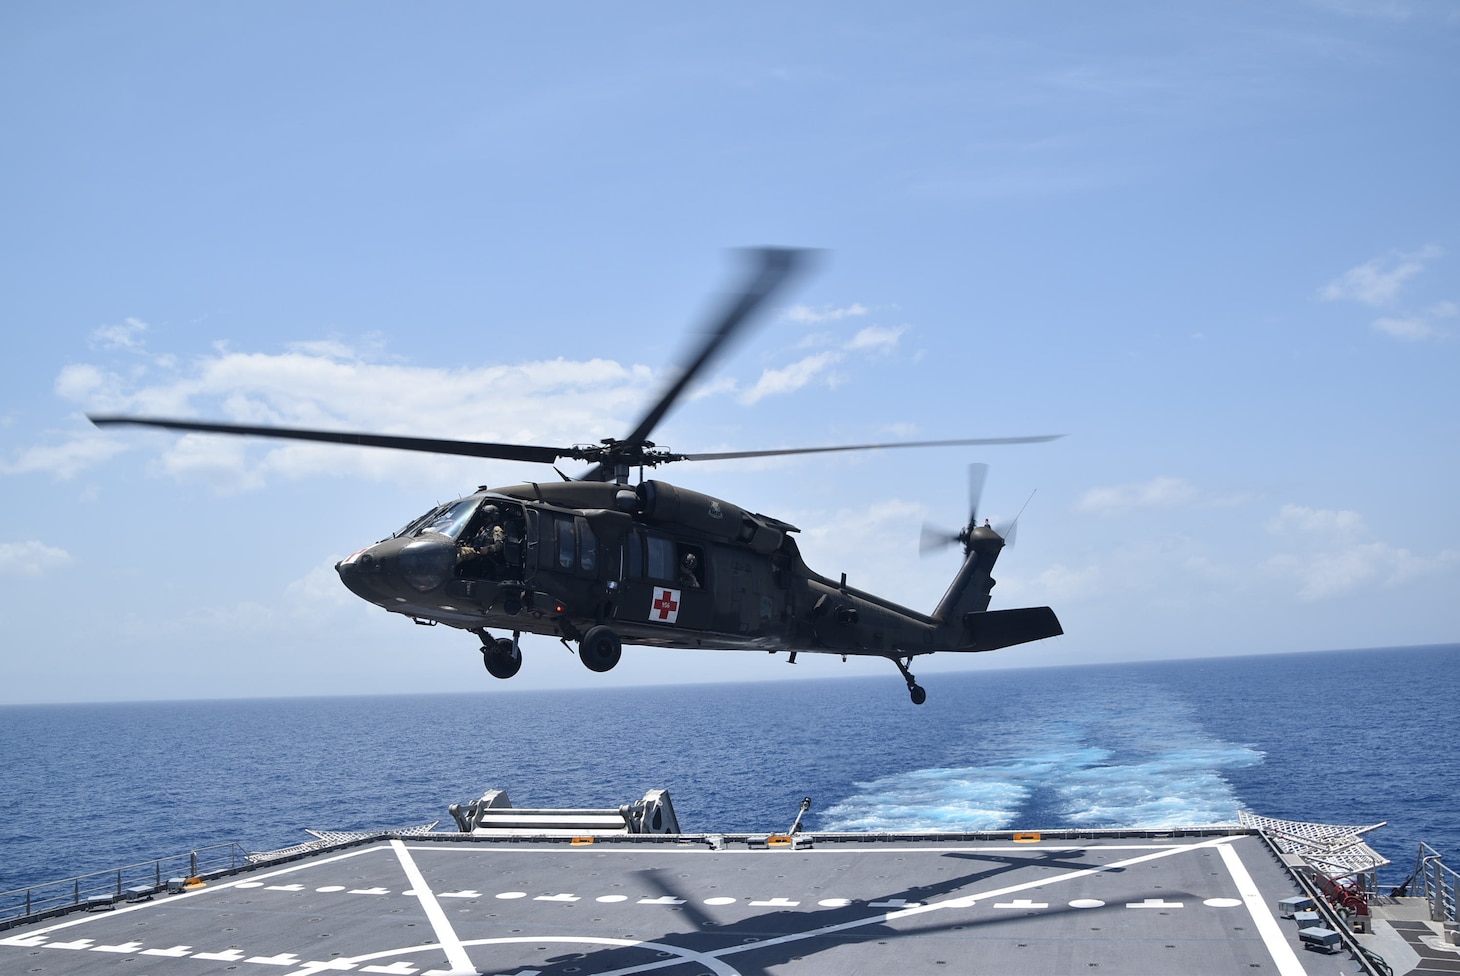 A U.S. Army UH-60 Blackhawk helicopter takes off from the Spearhead-class expeditionary fast transport ship USNS Burlington (T-EPF 10) after refueling, Aug. 21, 2021.